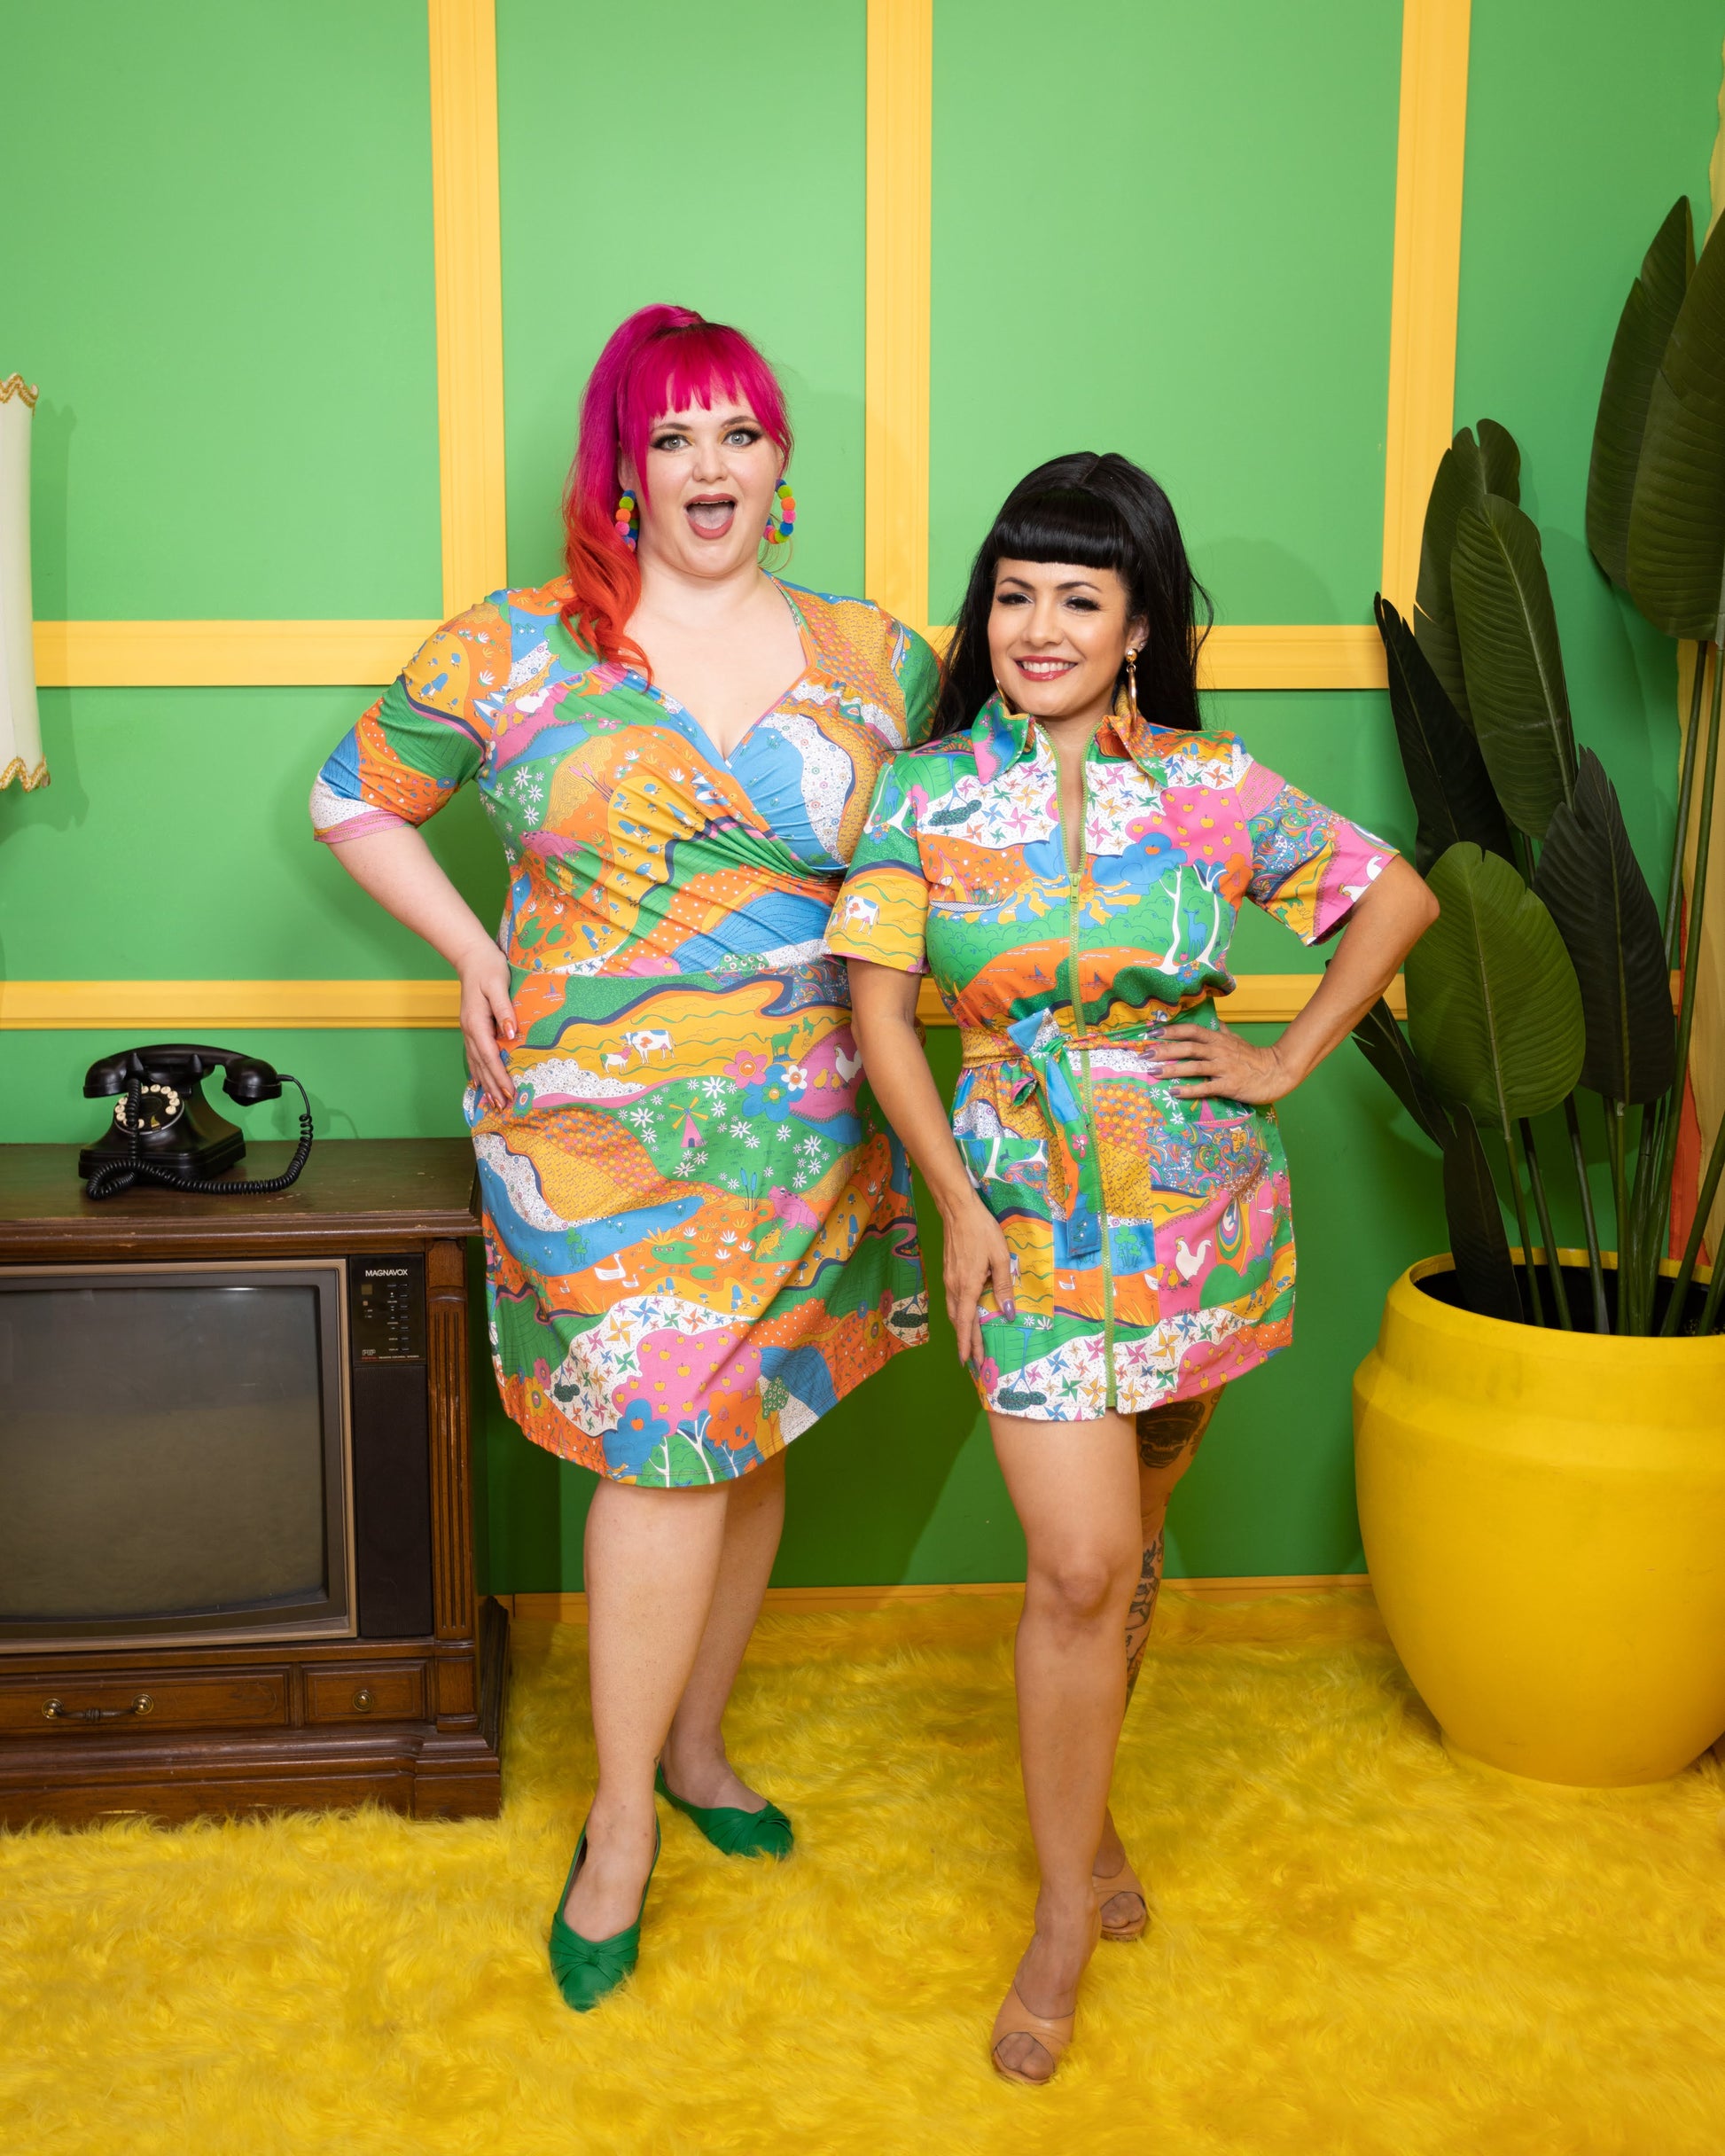 2 pretty models wearing bright rainbow landscape print dresses with chickens, trees, turtles, rivers and other fun elements